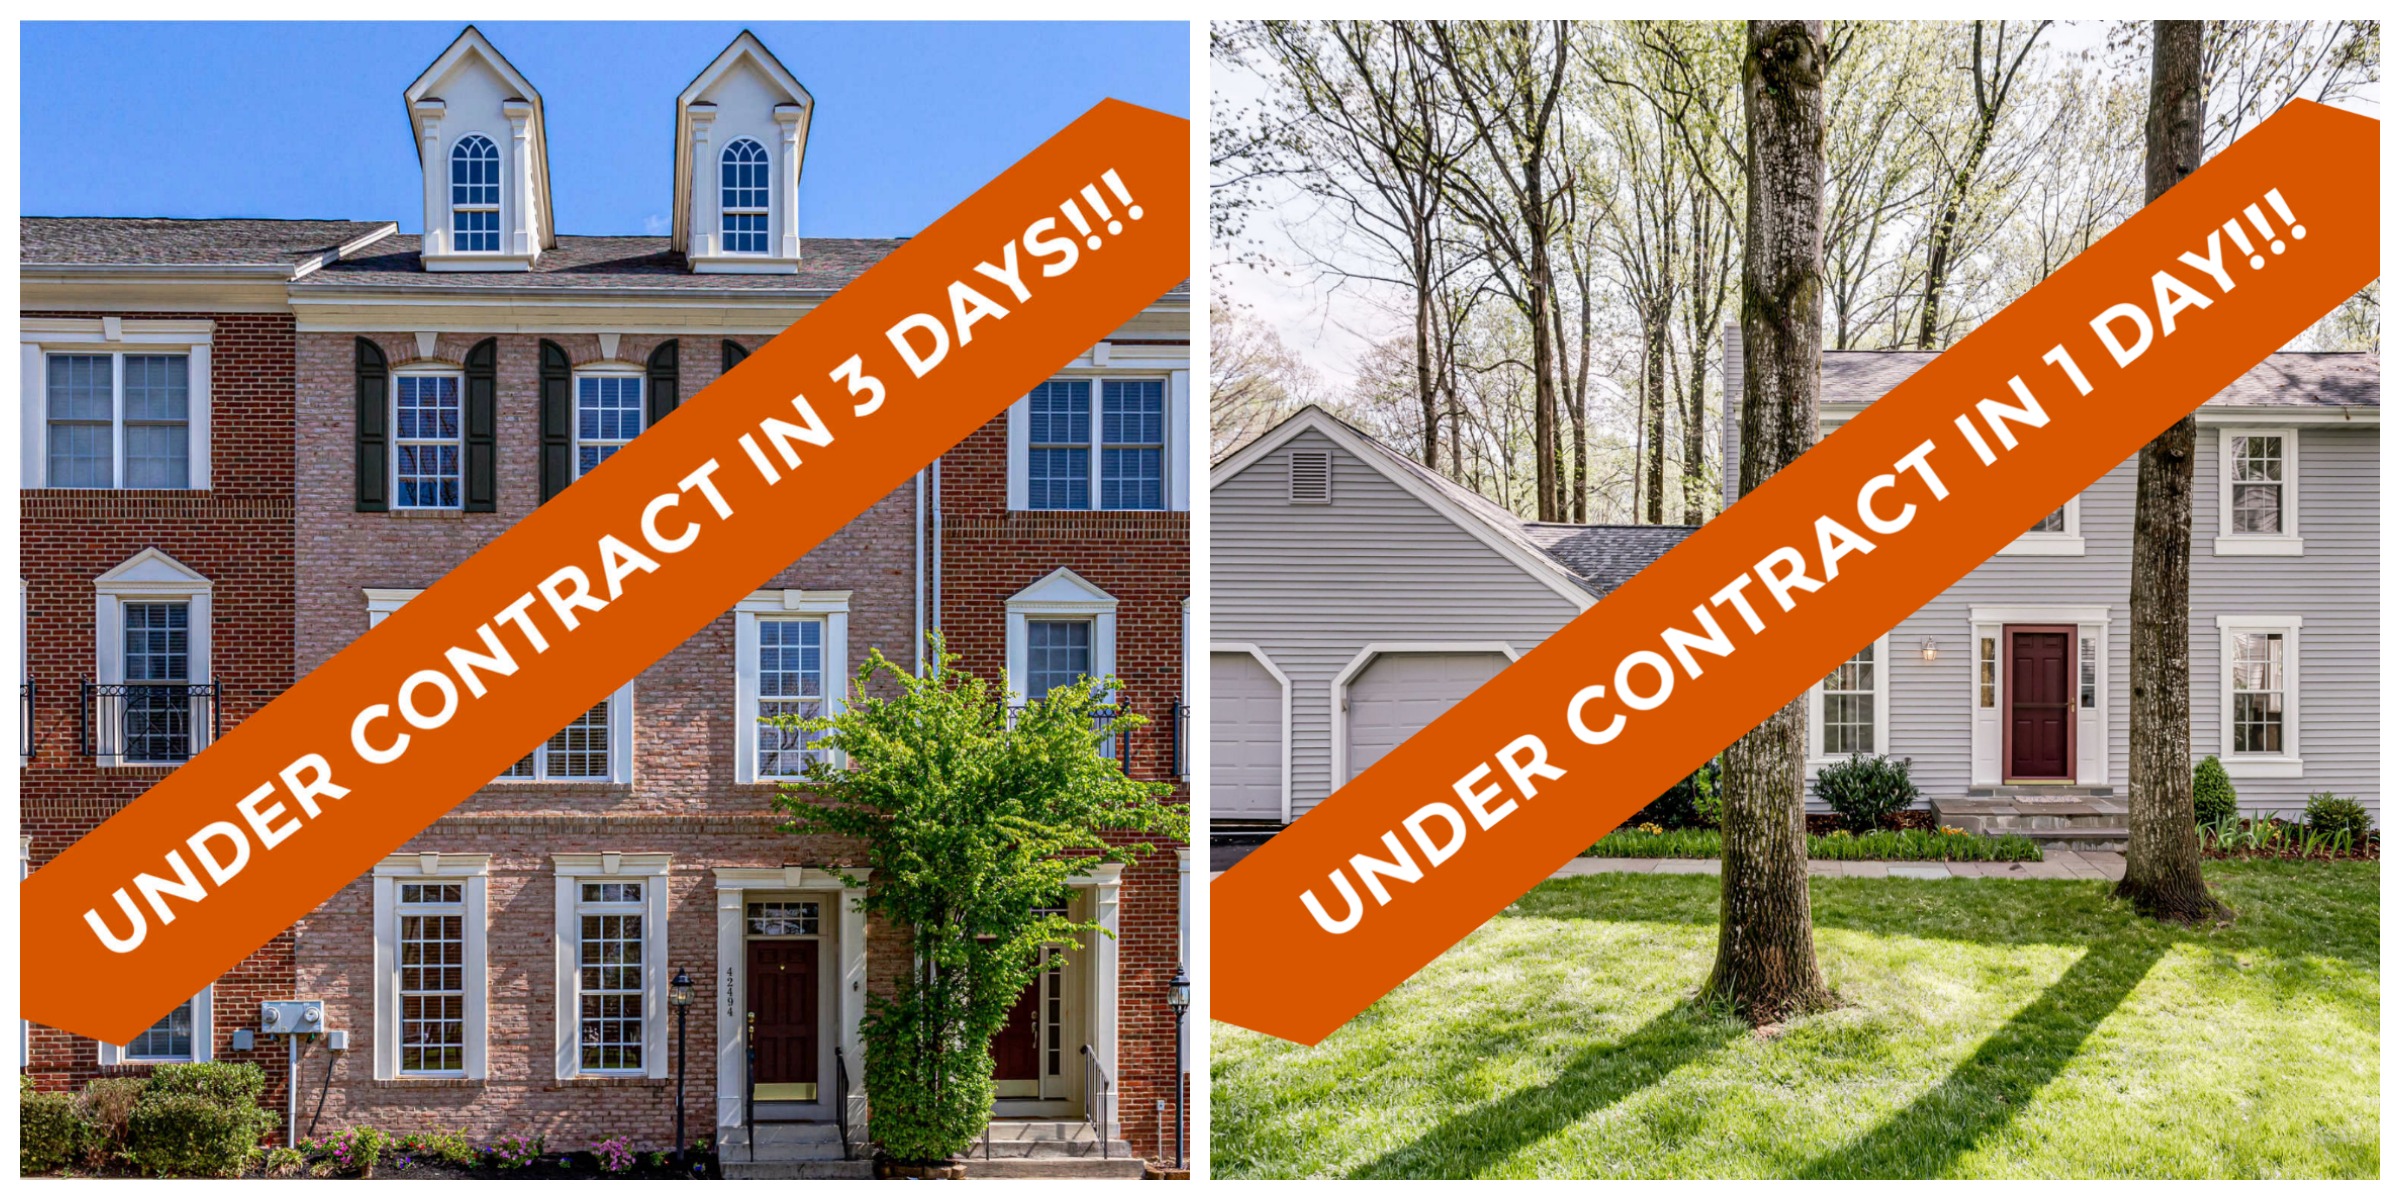 Under Contract in Days